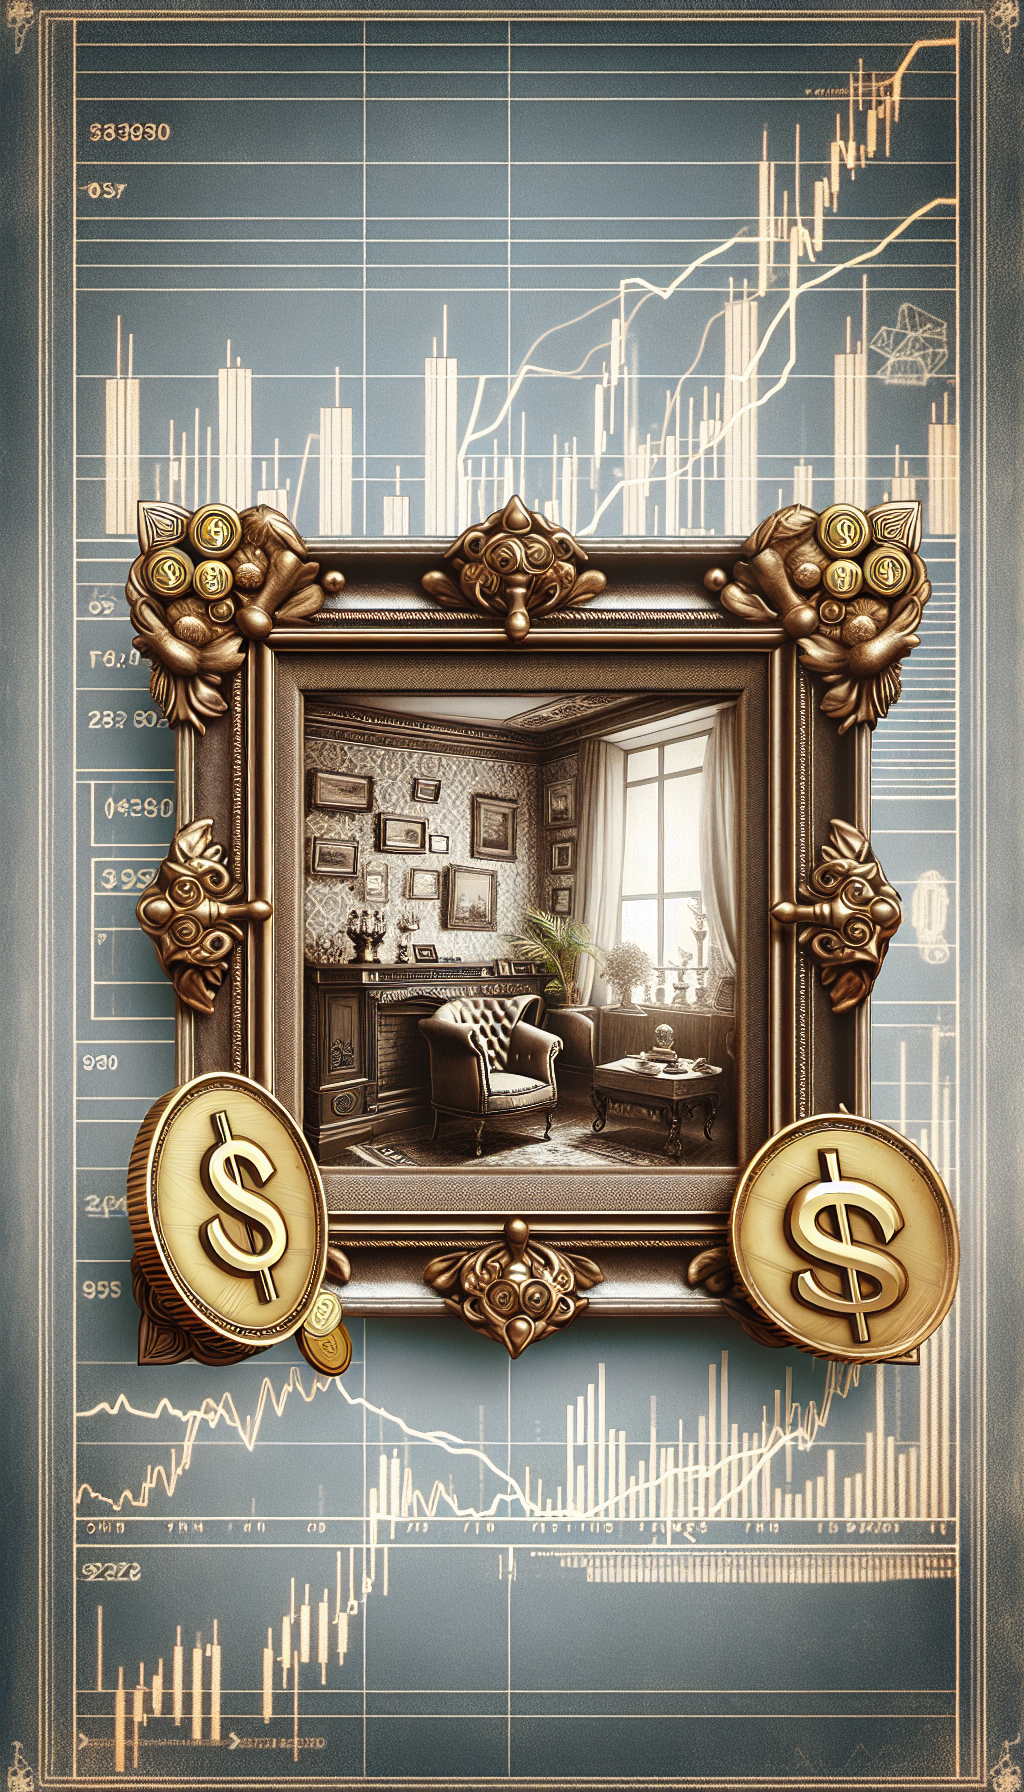 An illustration of an opulent vintage photo frame, encasing a nostalgic sepia-toned interior scene, rests against a backdrop of modern financial graphs and symbols. The frame is adorned with symbolic flourishes such as dollar signs and candlestick stock charts, highlighting the fusion of history and investment, while small golden coins subtly replace the usual ornate detailing to signify the hidden value of old home interior pictures.